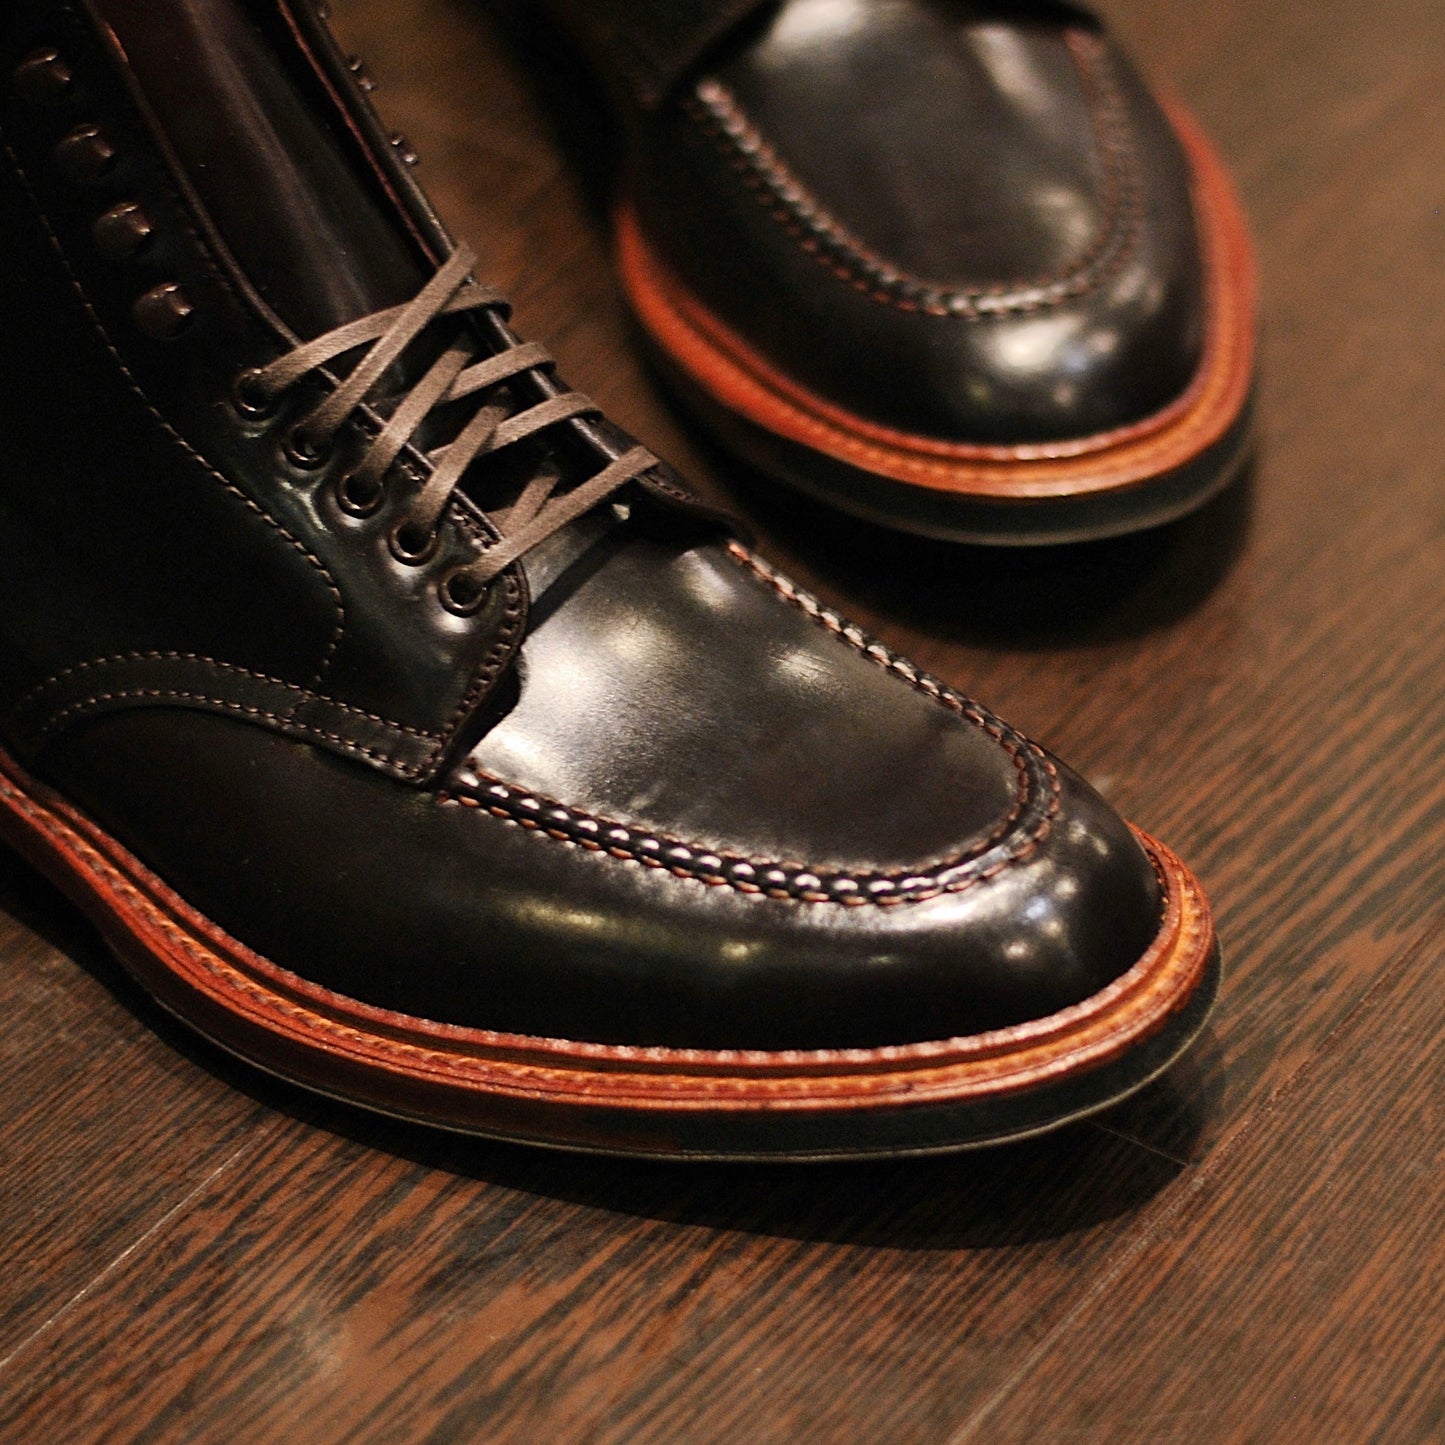 "Sodo" Handsewn U-Tip Boot in Color 8 Shell Cordovan, Barrie Last